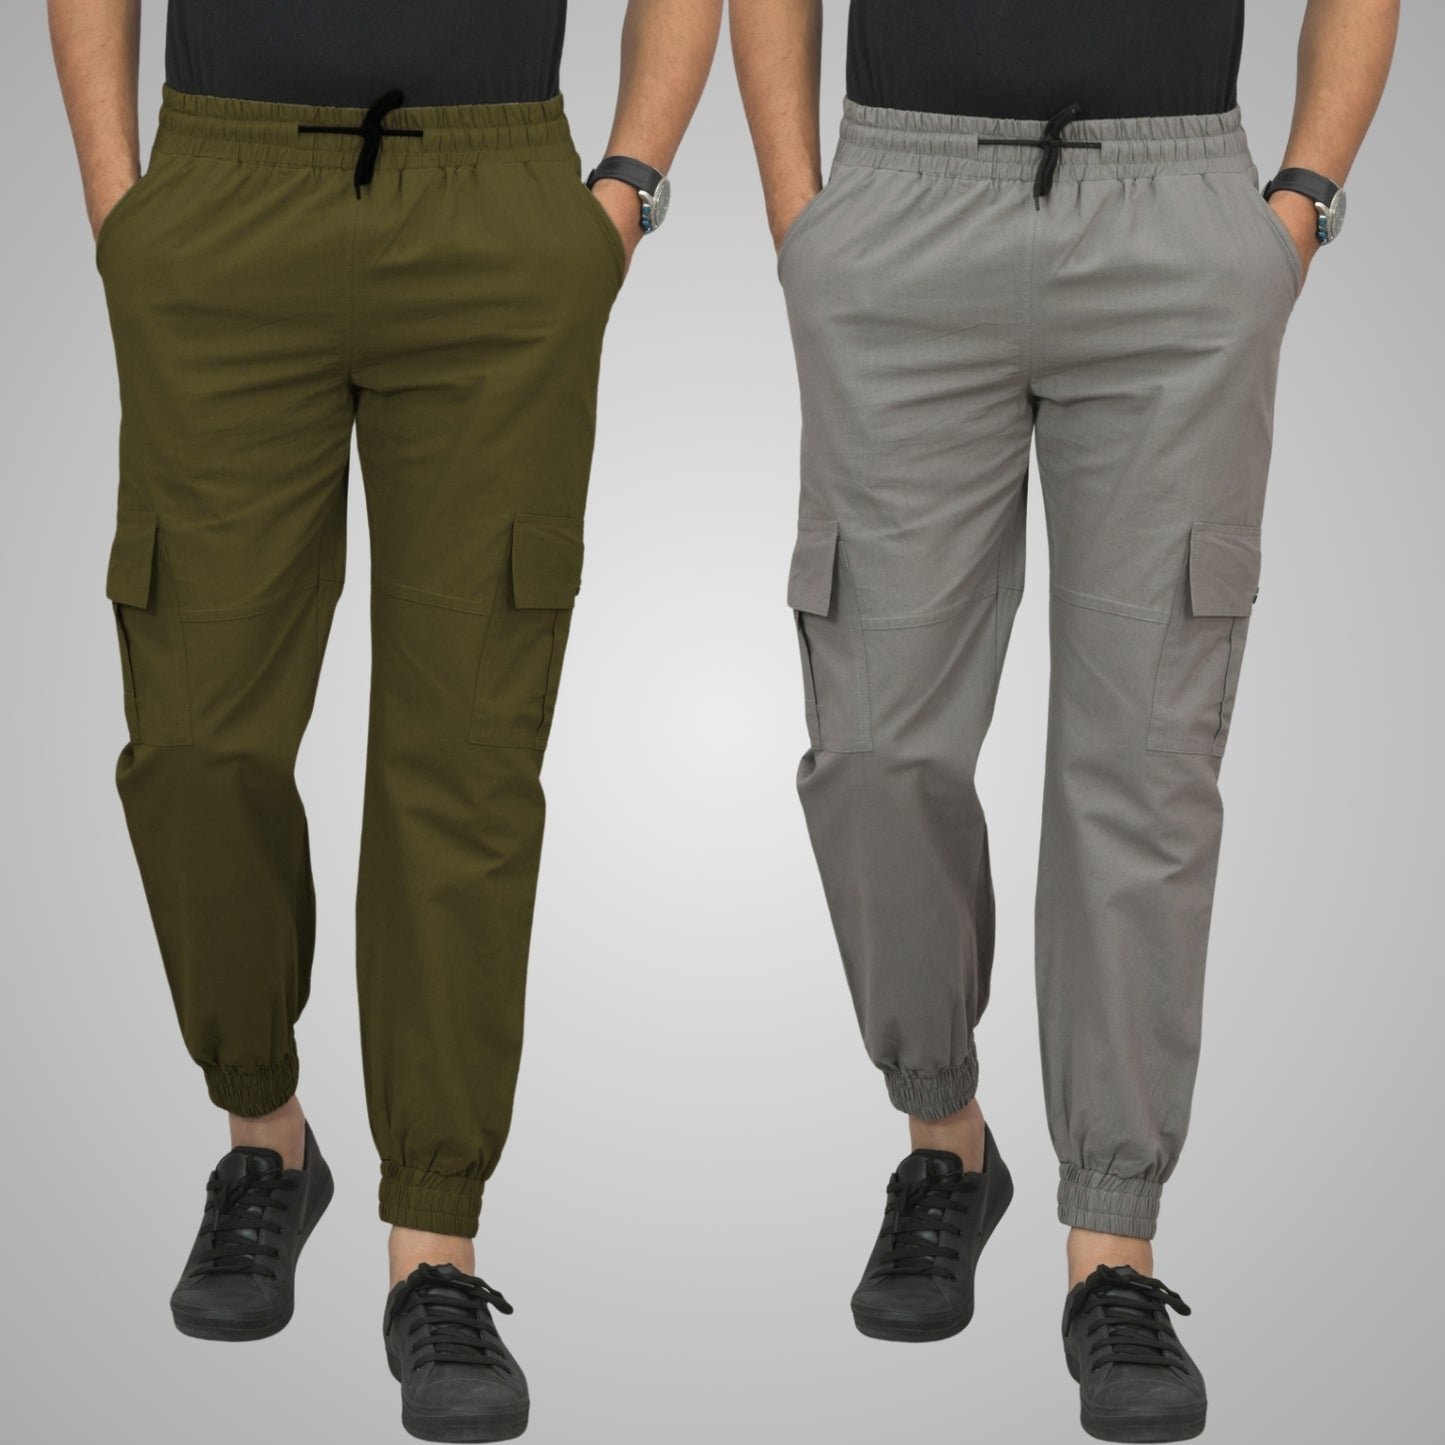 Combo Pack Of Mens Mehndi Green And Grey Five Pocket Cotton Cargo Pants